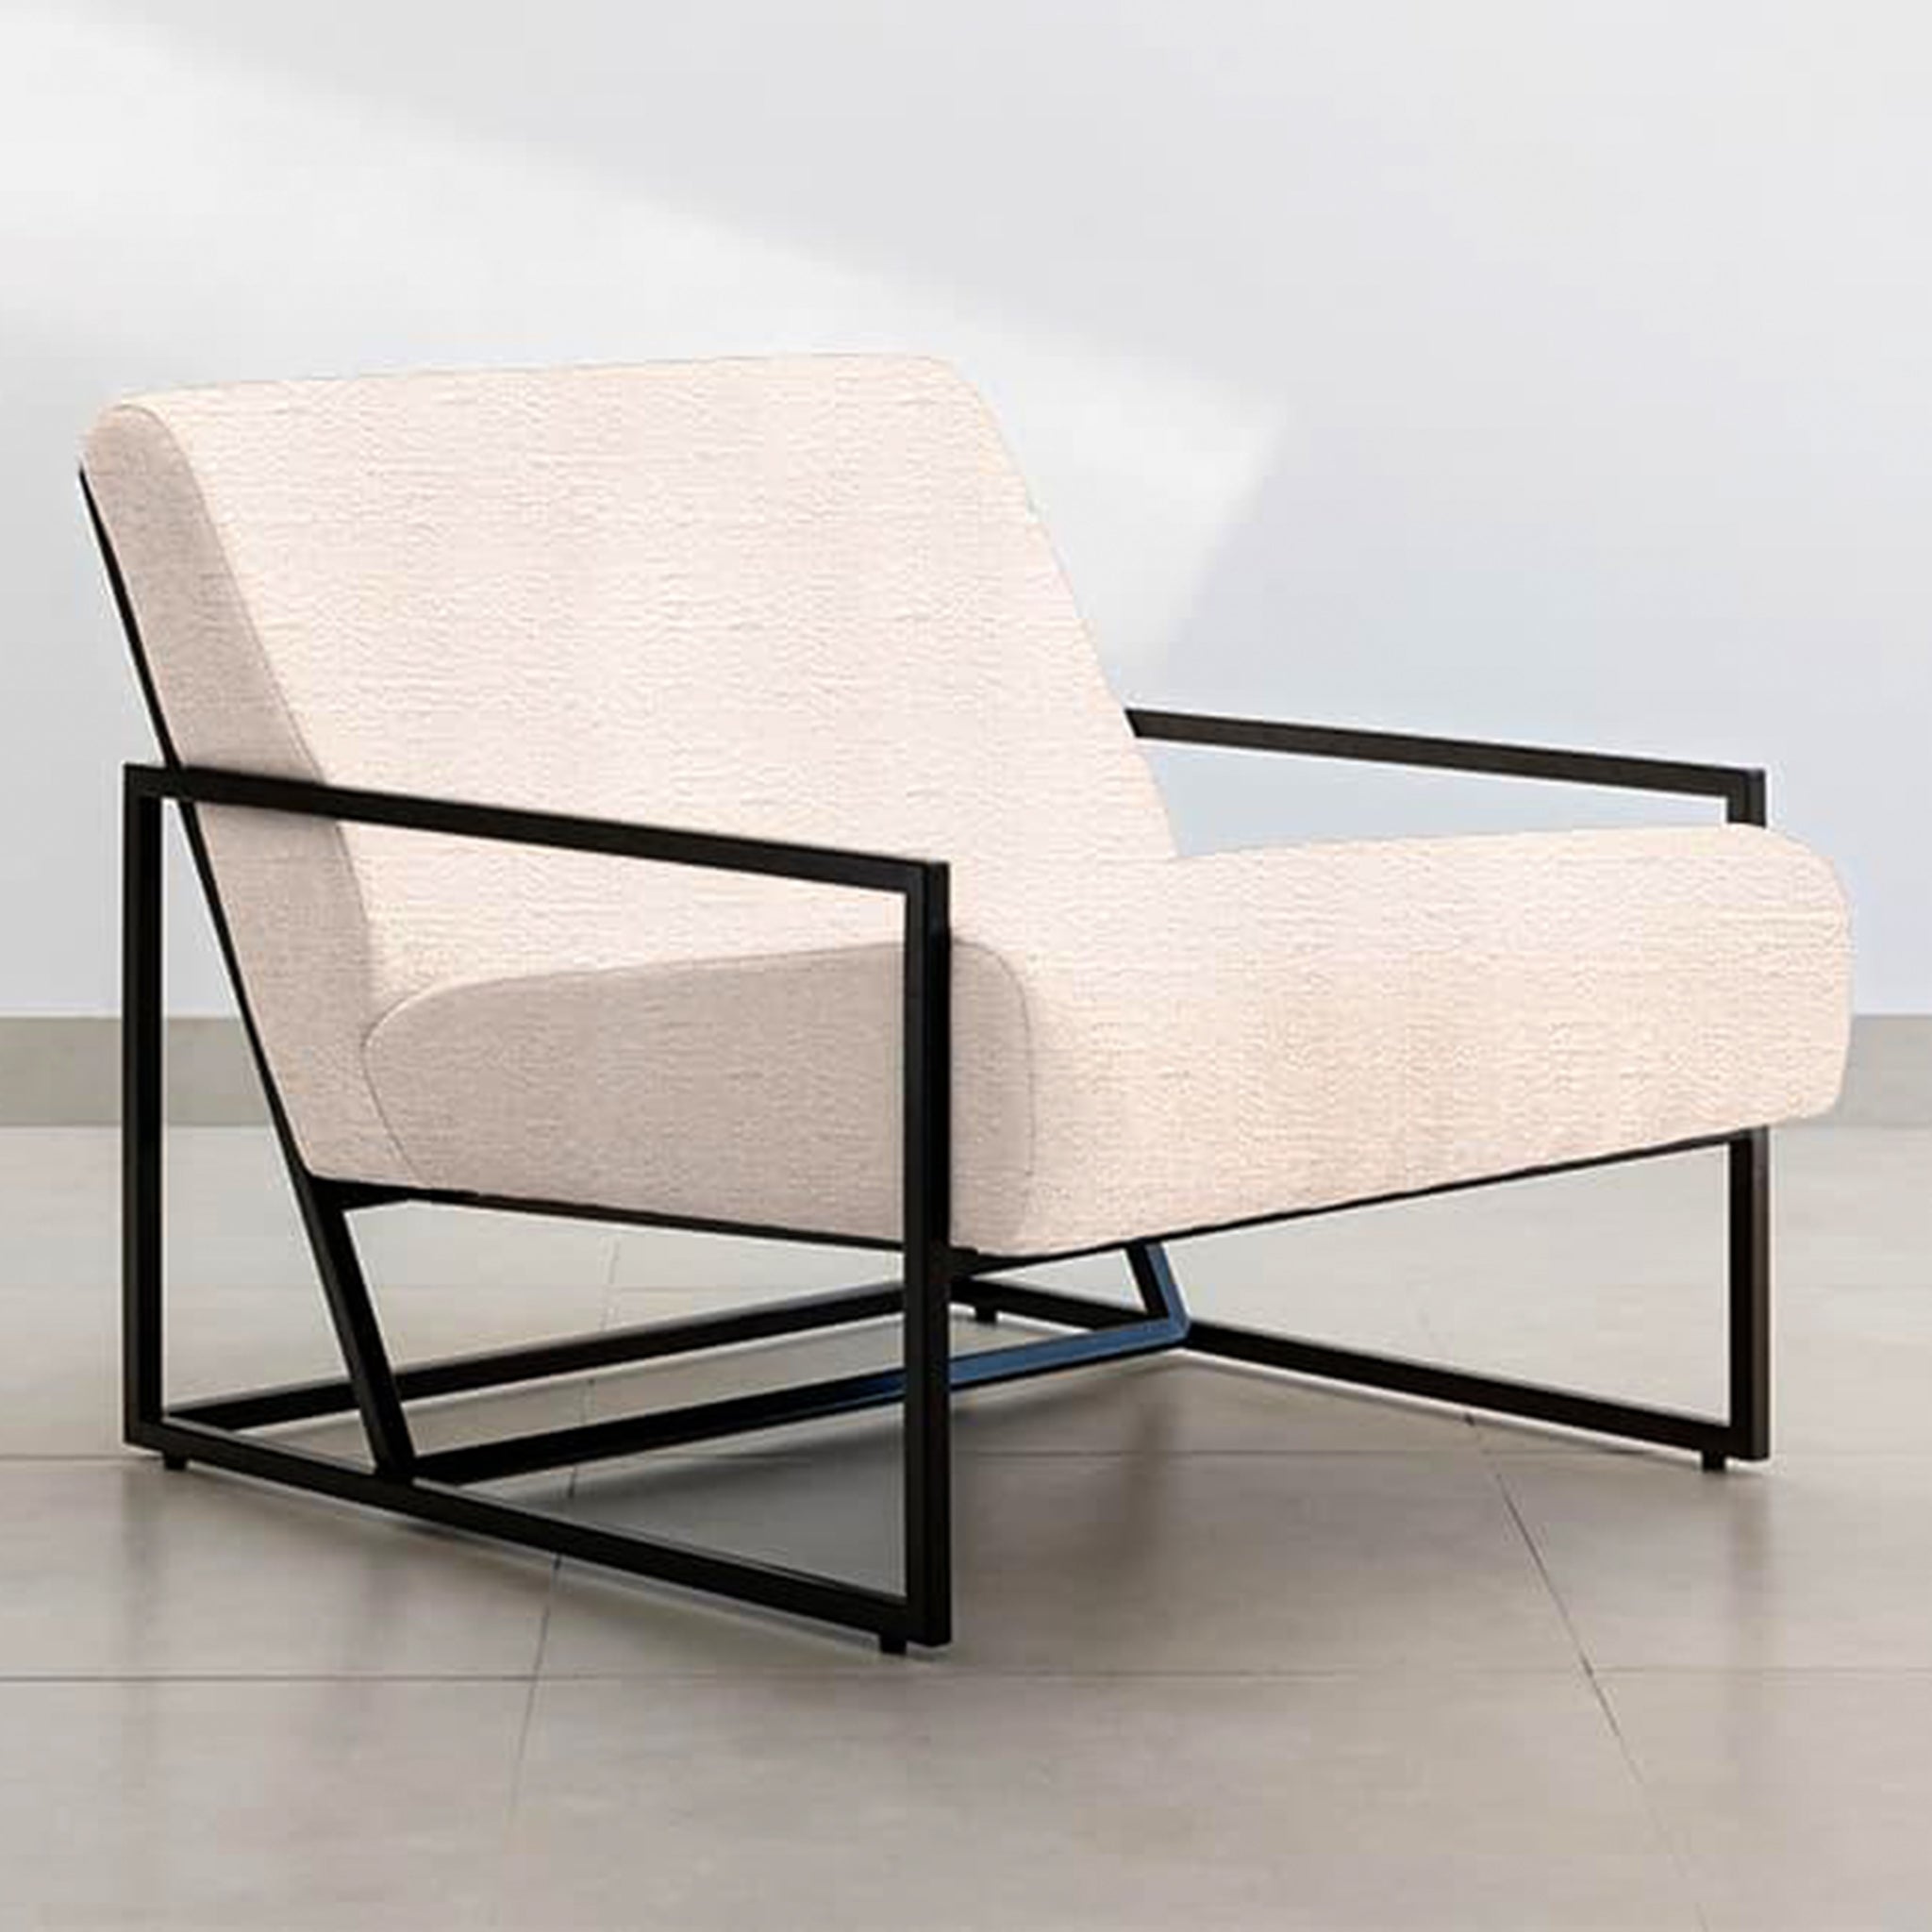 The Daphne Accent Chair in a minimalist setting, showcasing its clean lines and modern design.